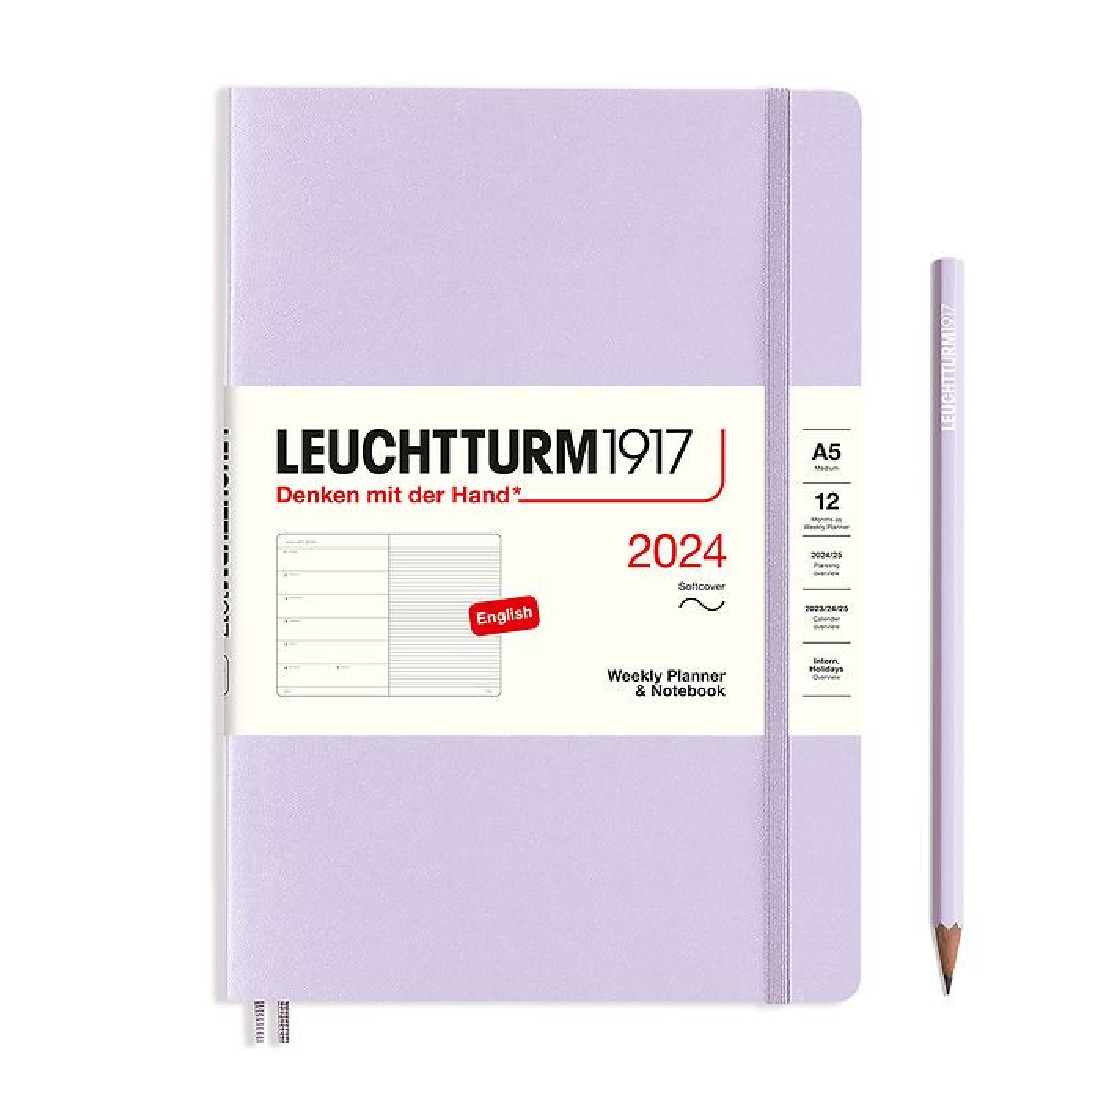 Leuchtturm 1917 Weekly Planner and Notebook 2024 Lilac Medium A5 Soft Cover